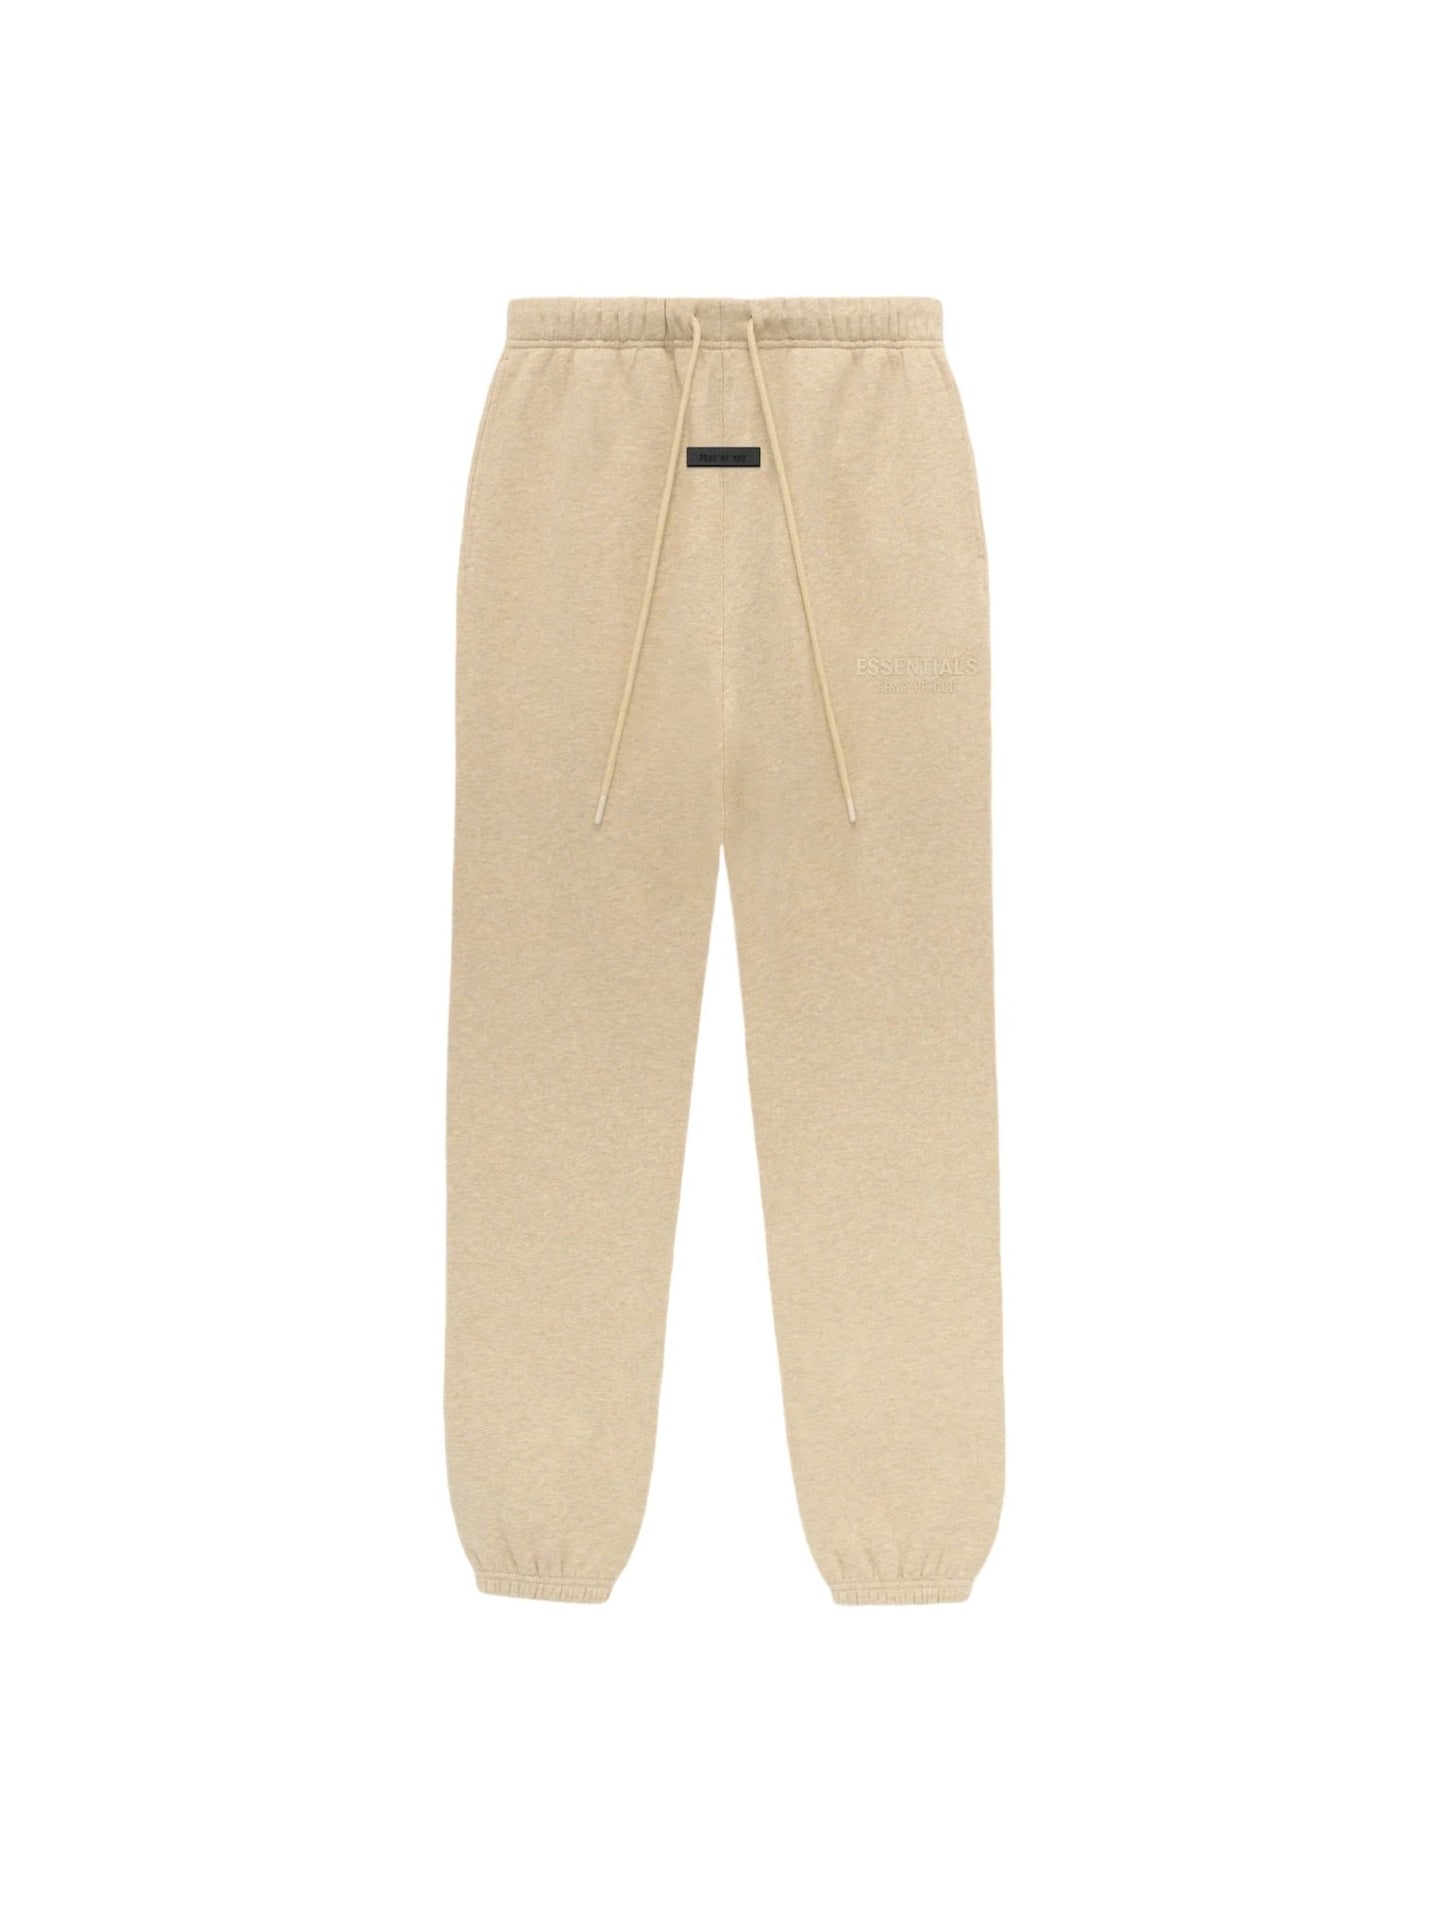 Fear of God Essentials Sweatpant Gold Heather - Supra Sneakers